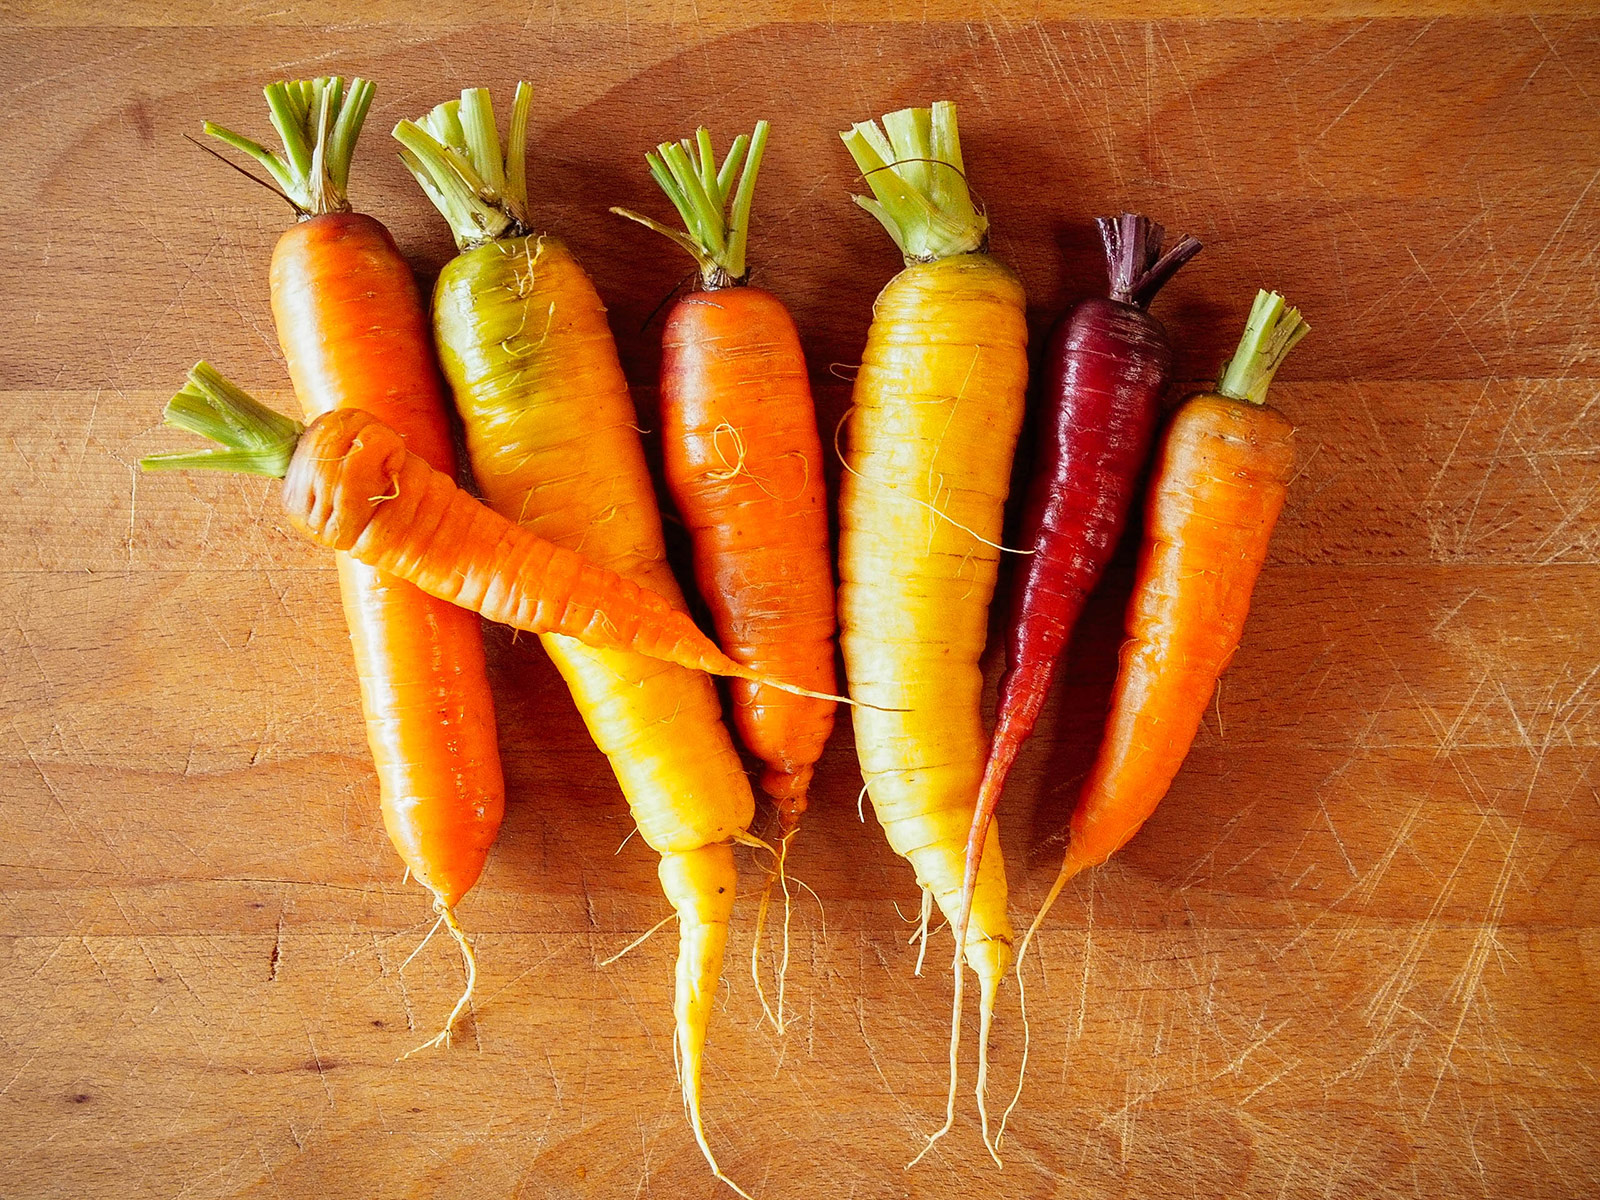 Seven colorful yellow, orange, and purple carrots arranged on a butcher block surface